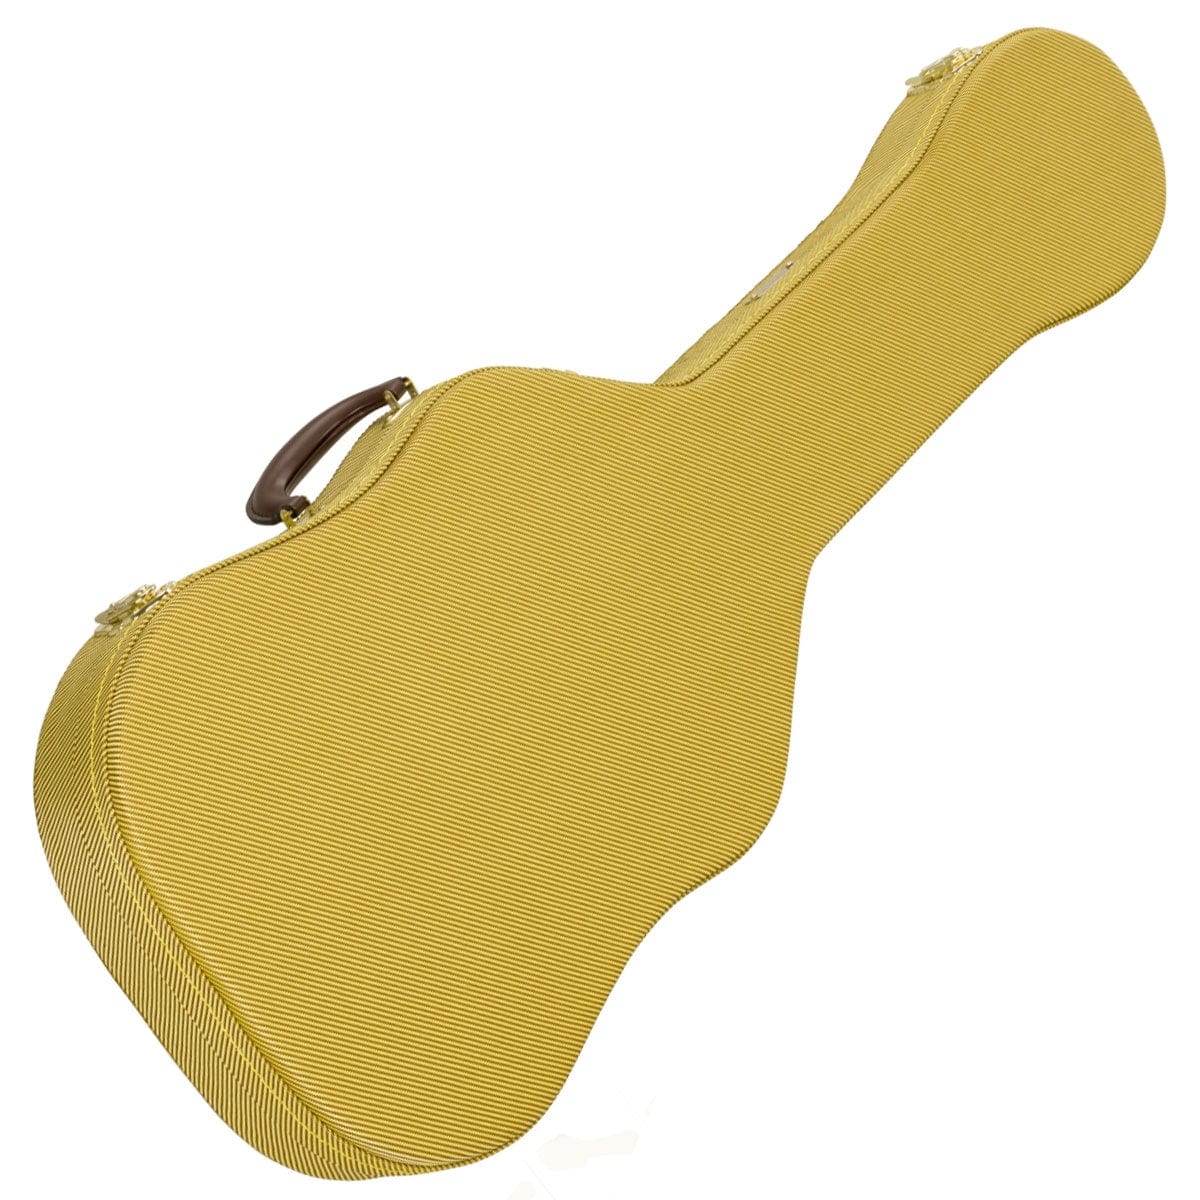 Fender Telecaster Thermometer Case - Tweed Reviews